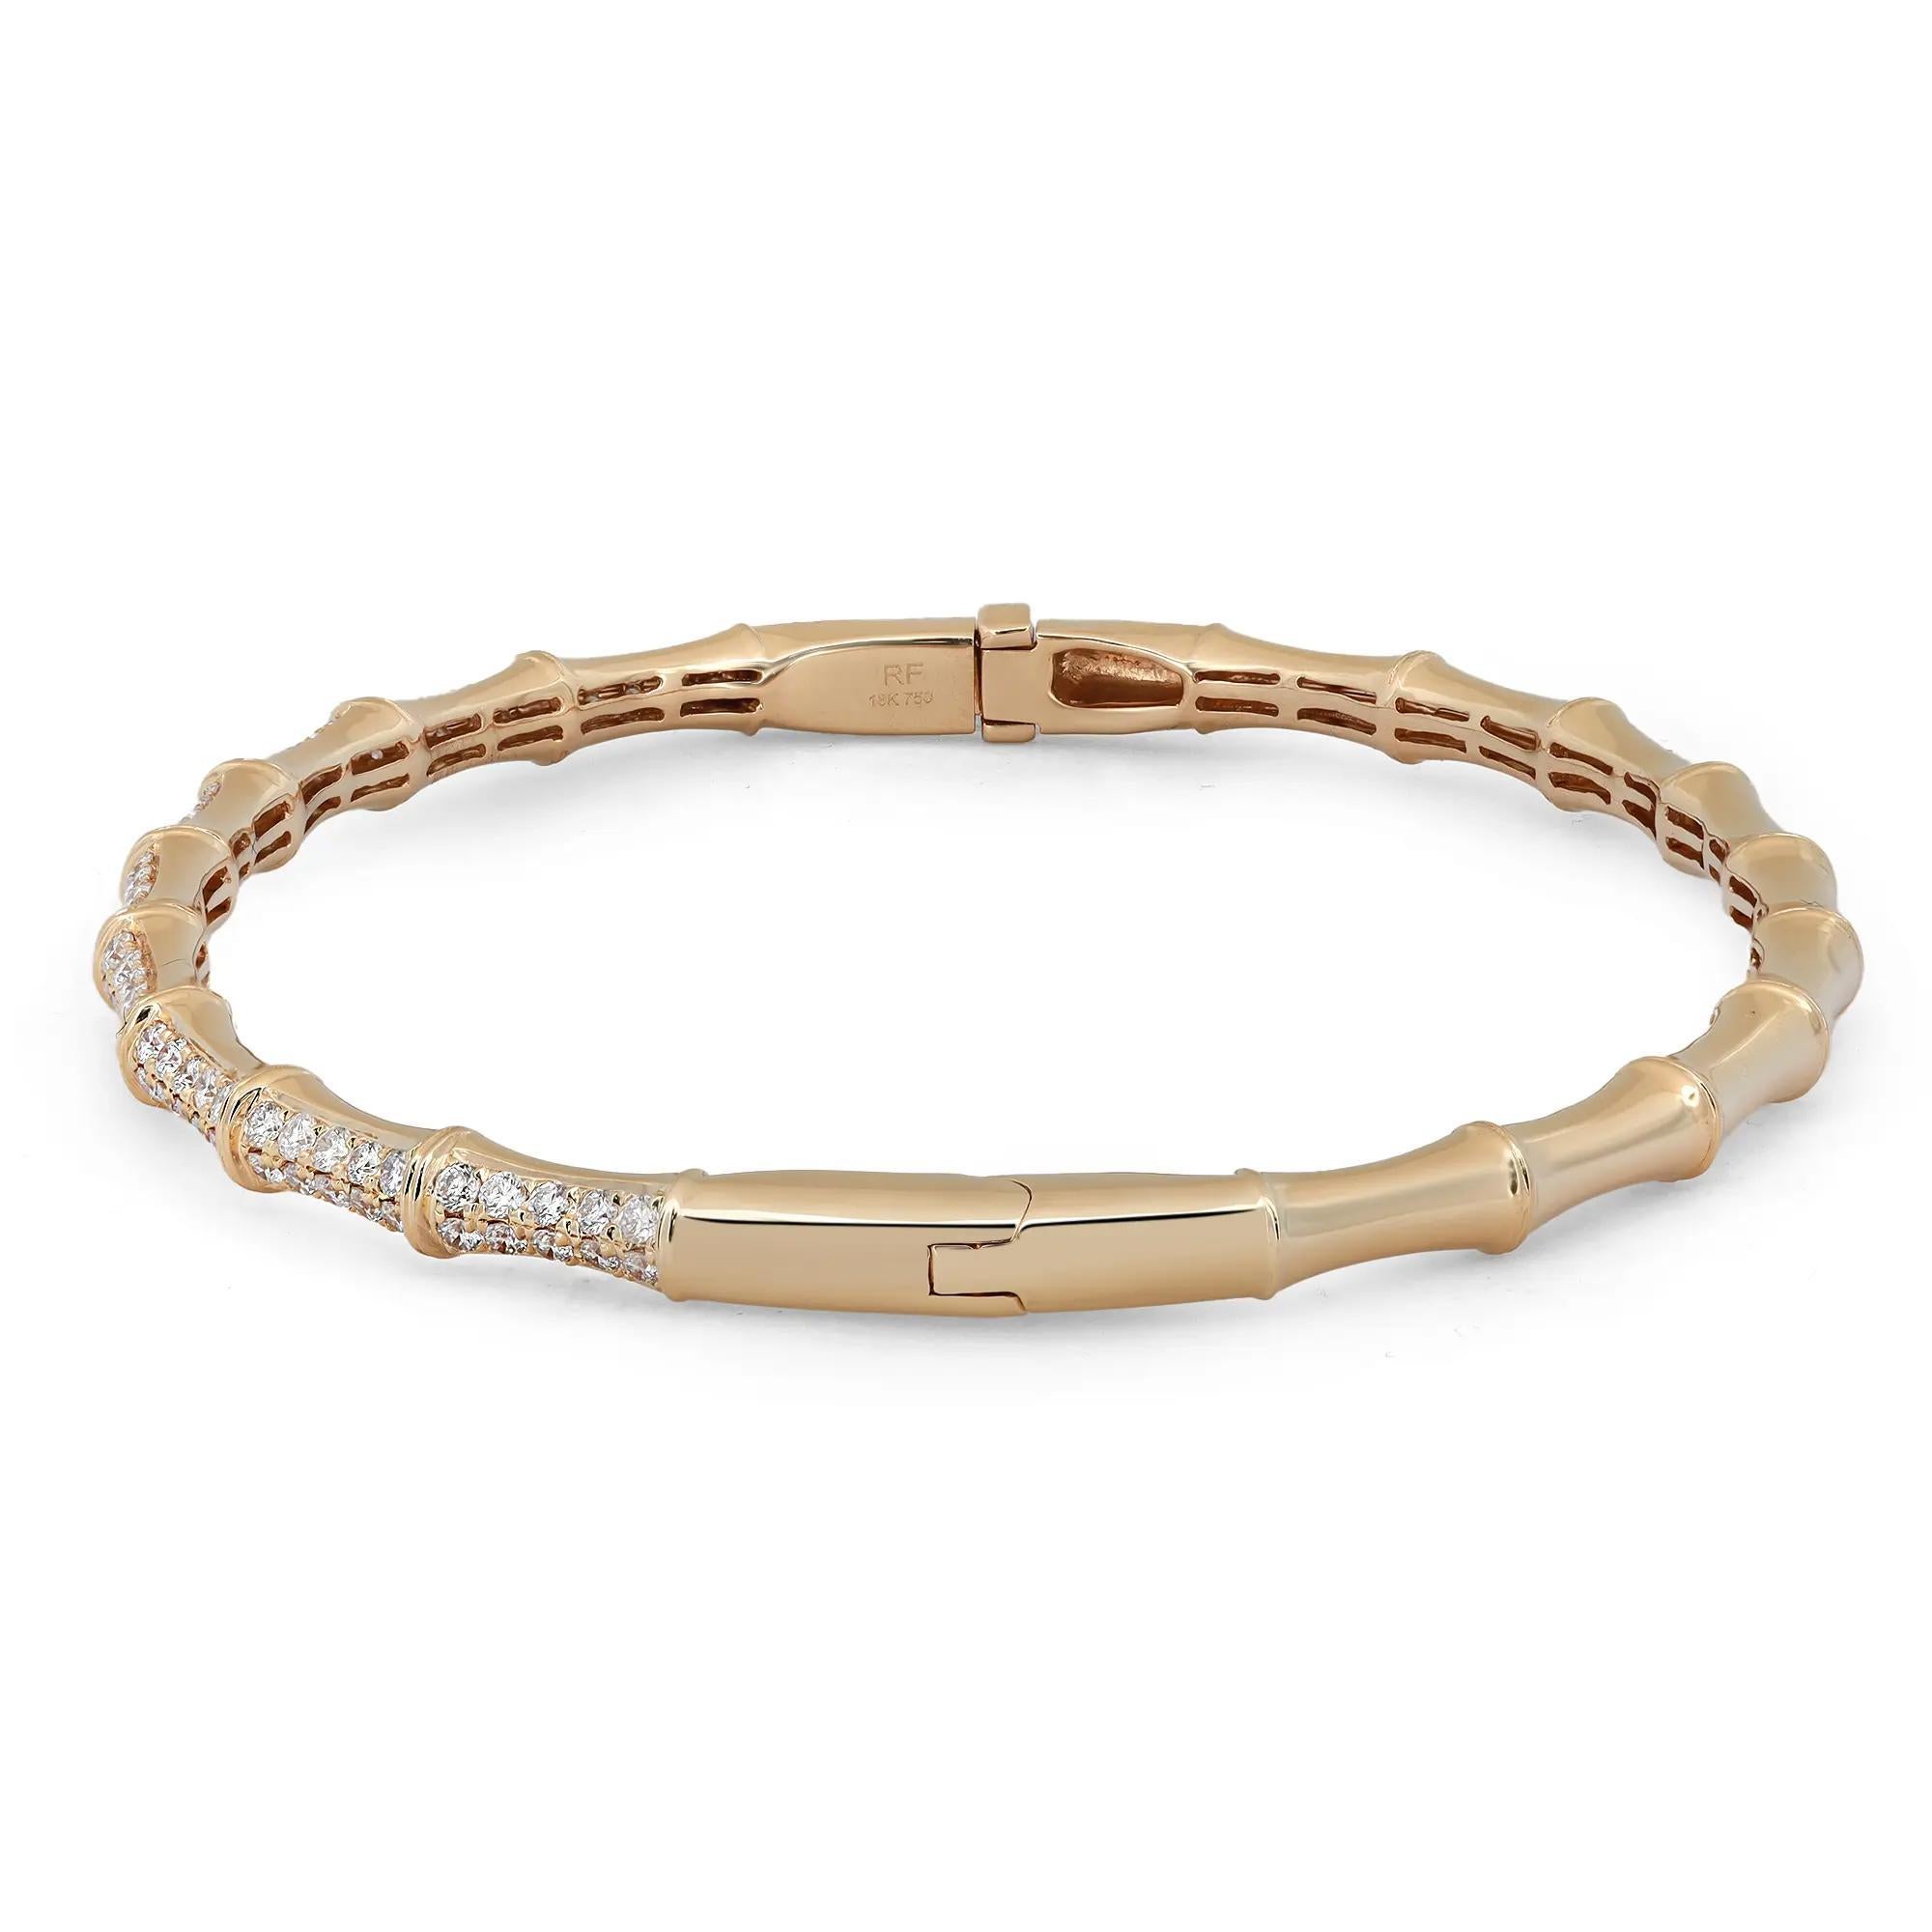 Introducing our 0.93 Carat Diamond Bamboo Bangle Bracelet, a radiant fusion of nature-inspired elegance and timeless sophistication. Crafted in lustrous 18K yellow gold, this bracelet celebrates the fluidity and grace of bamboo, delicately captured